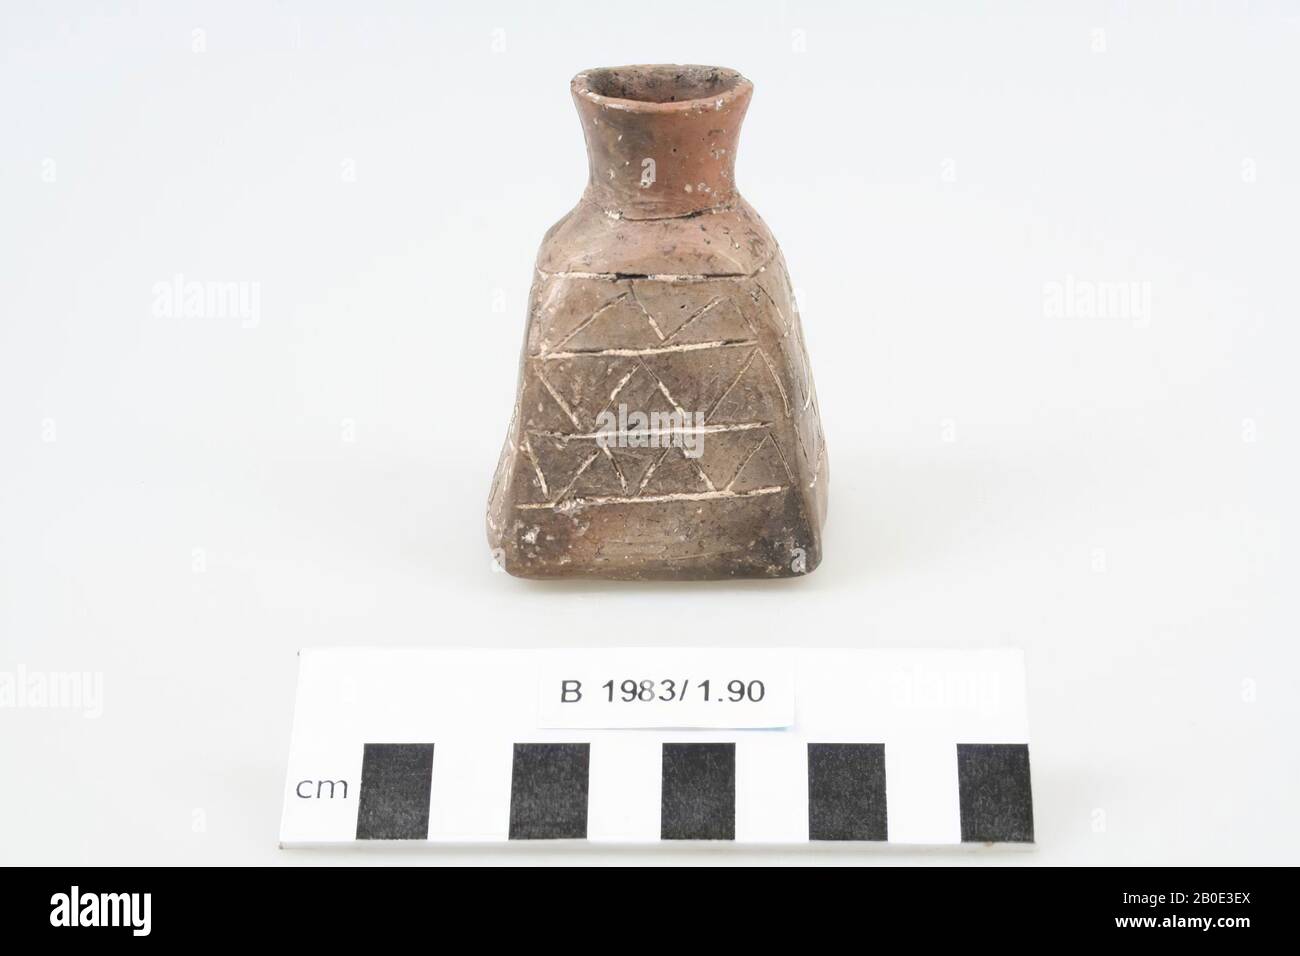 A square vase with a round neck and a flat bottom. The neck and edge run slightly outwards. The jar is decorated with triangular patterns inlaid with a white paste. In the mascara jar is still the original eyes black !, crockery, pottery, H 6 cm, W 5.7 cm, H 78 cm, Iron Age II-III 1000-700 BC, Iran Stock Photo